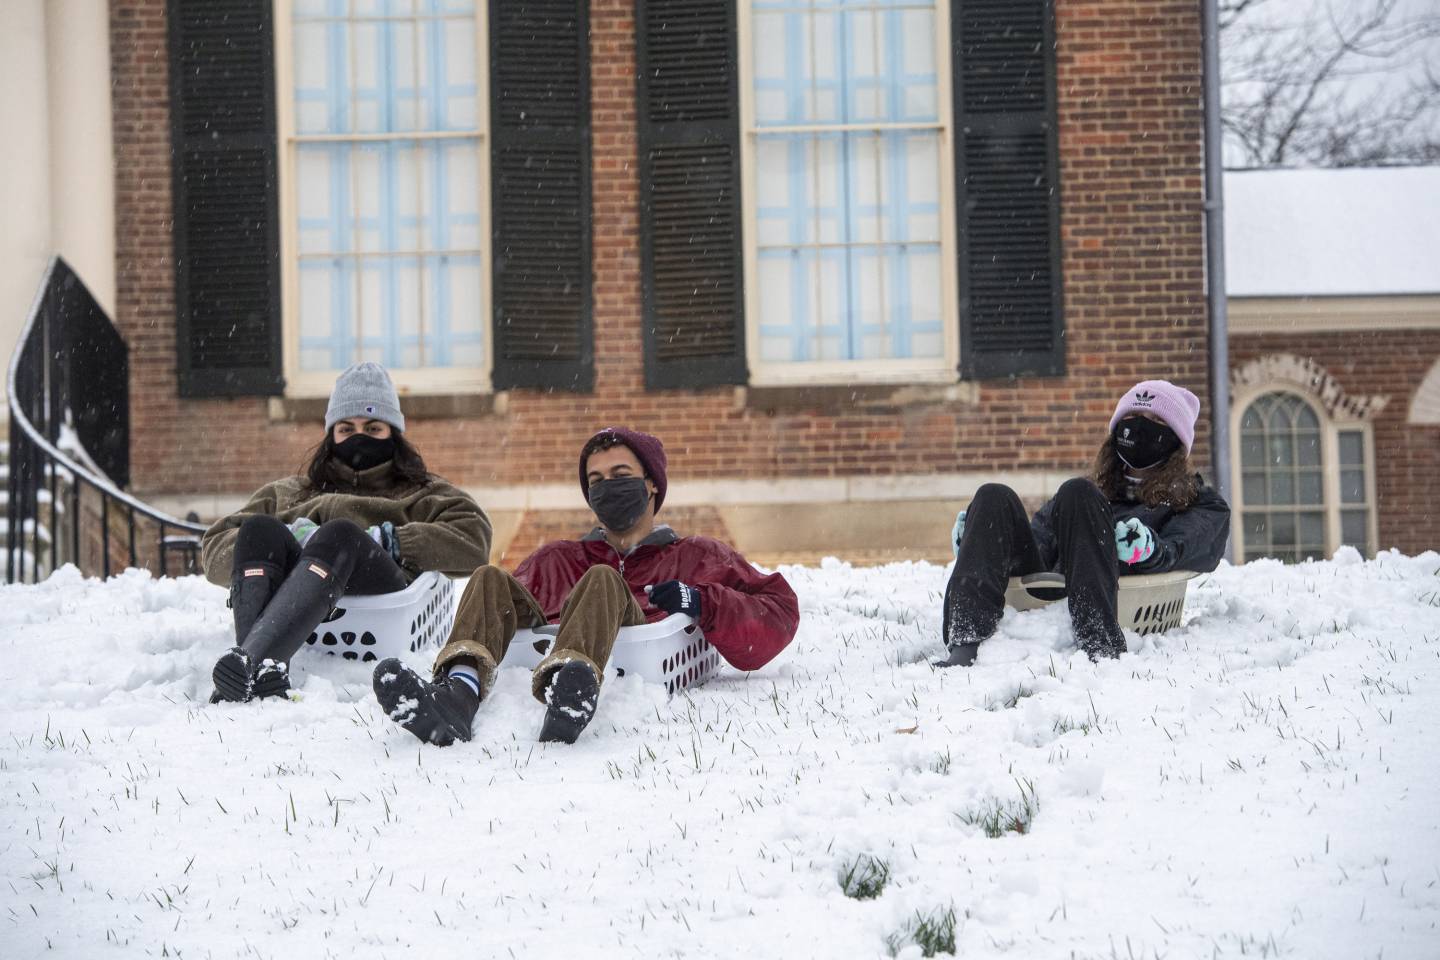 Three masked students sit in laundry baskets in the snow